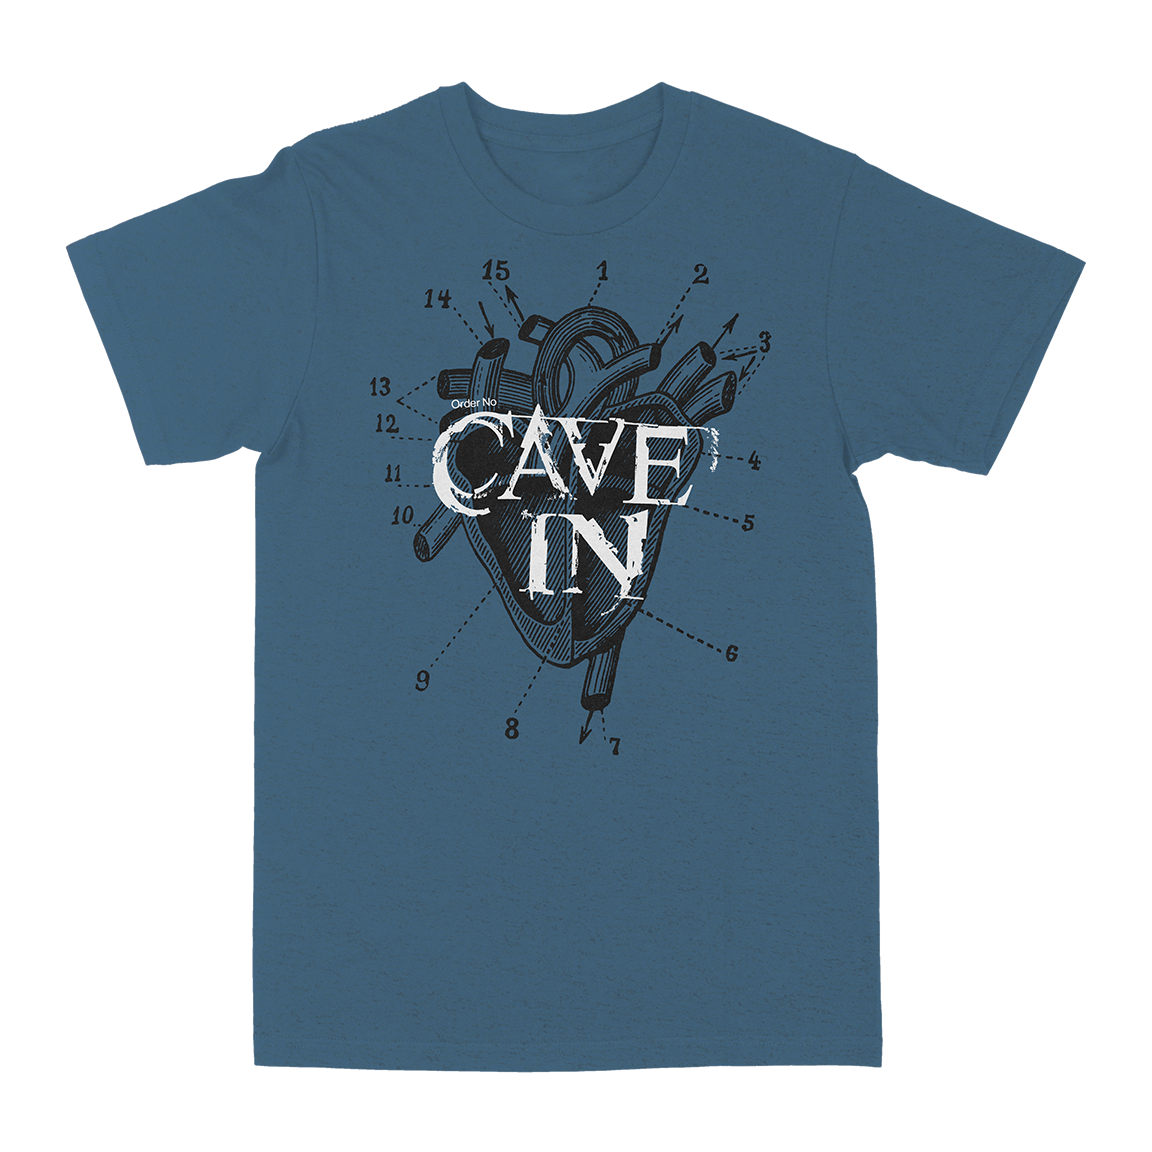 CAVE IN "UYHS Heart“ Slate T-Shirt